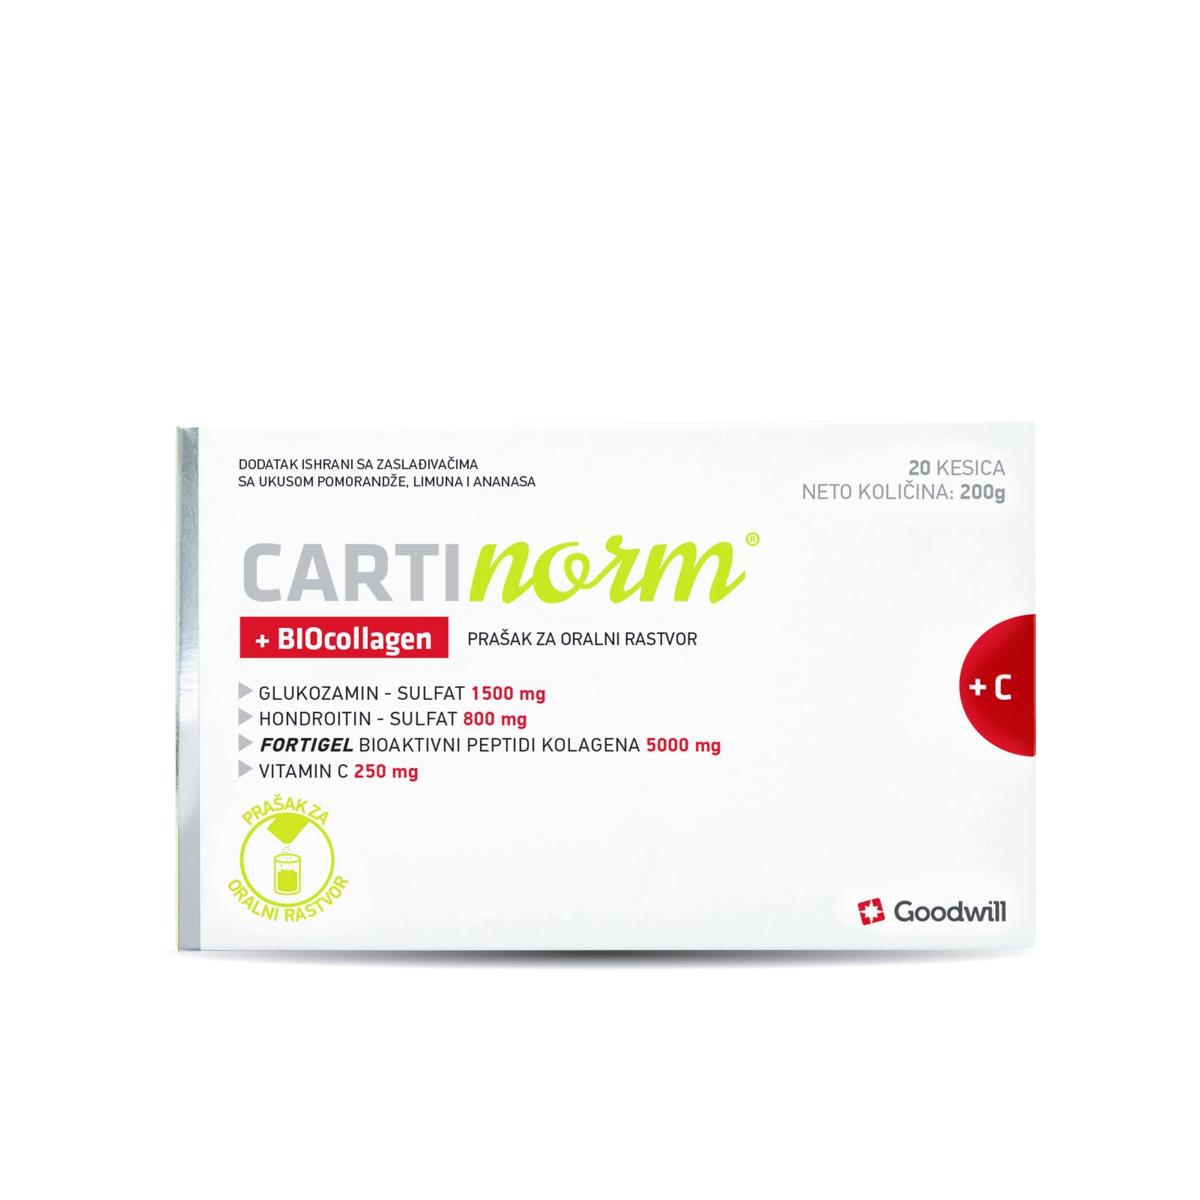 Selected image for GOODWILL Cartinorm Biocollagen 20 kesica